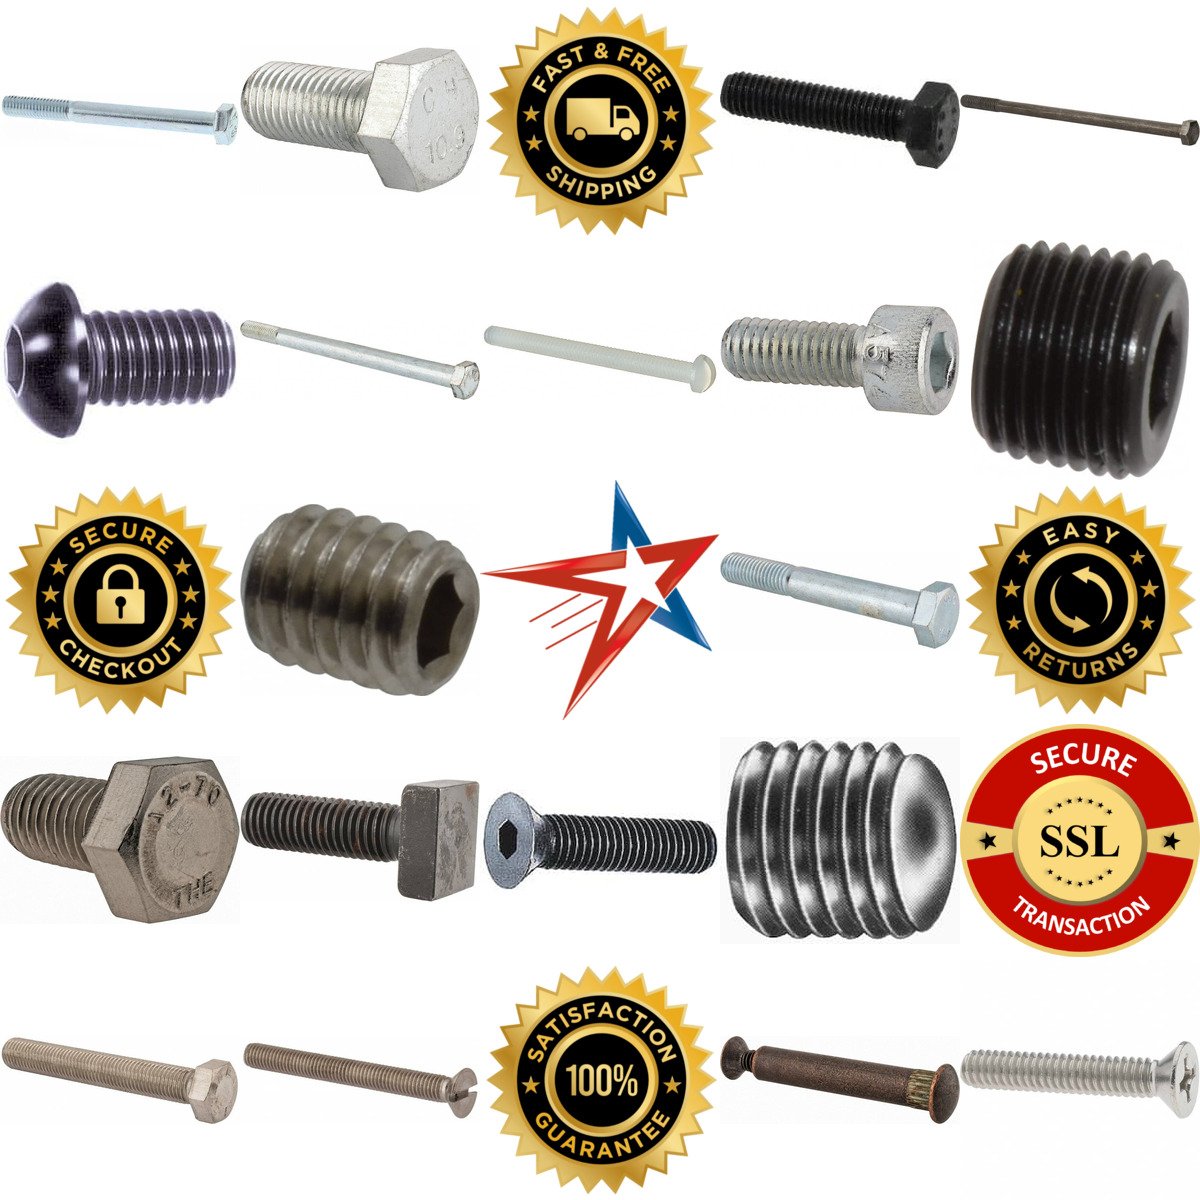 A selection of Bolts Screws and Cap Screws products on GoVets